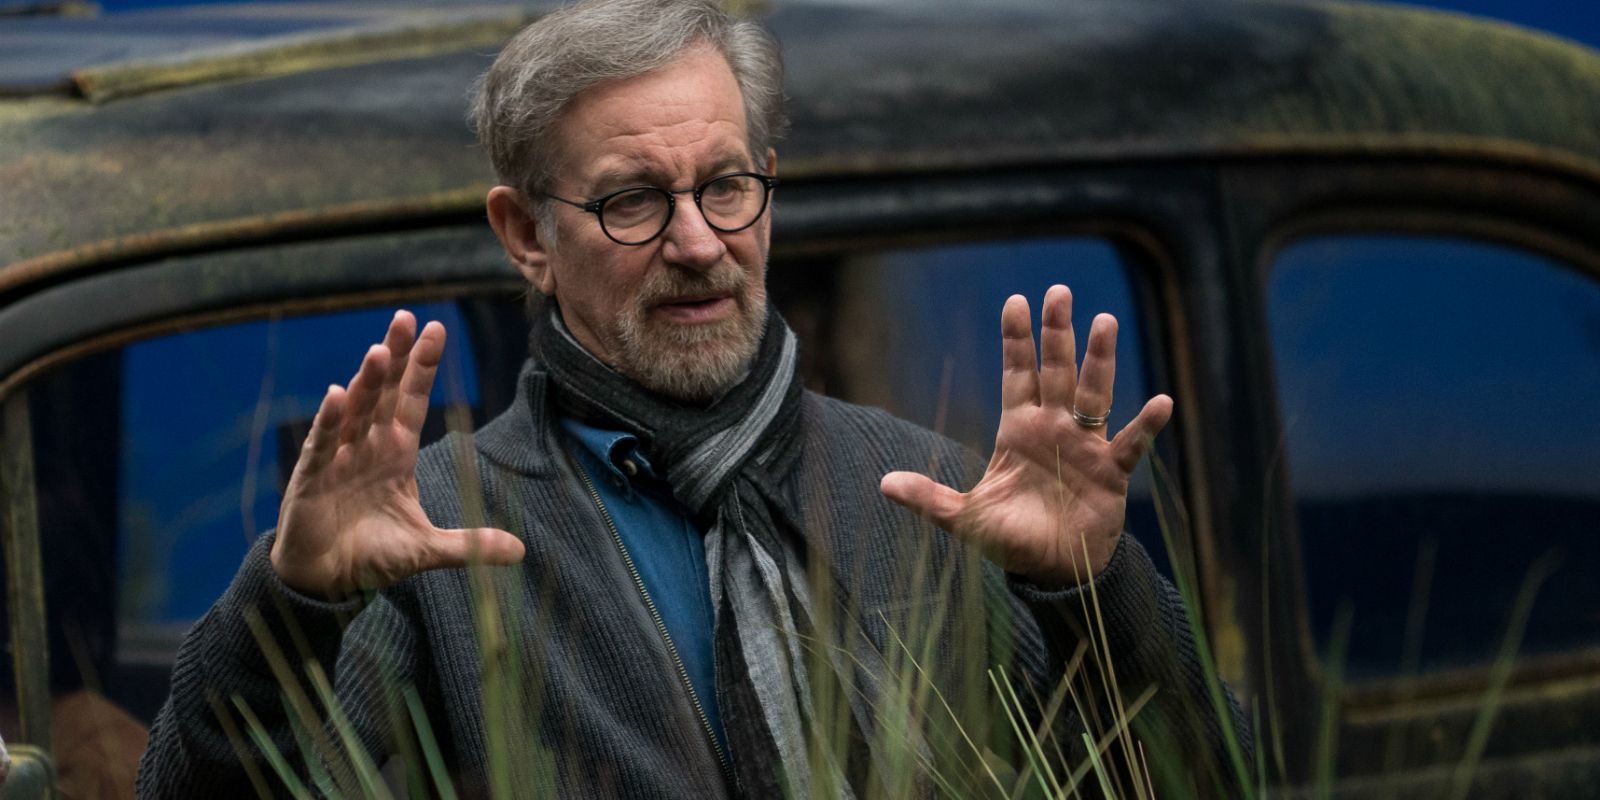 Tintin 2 Won’t Release For Another 3 Years Says Spielberg